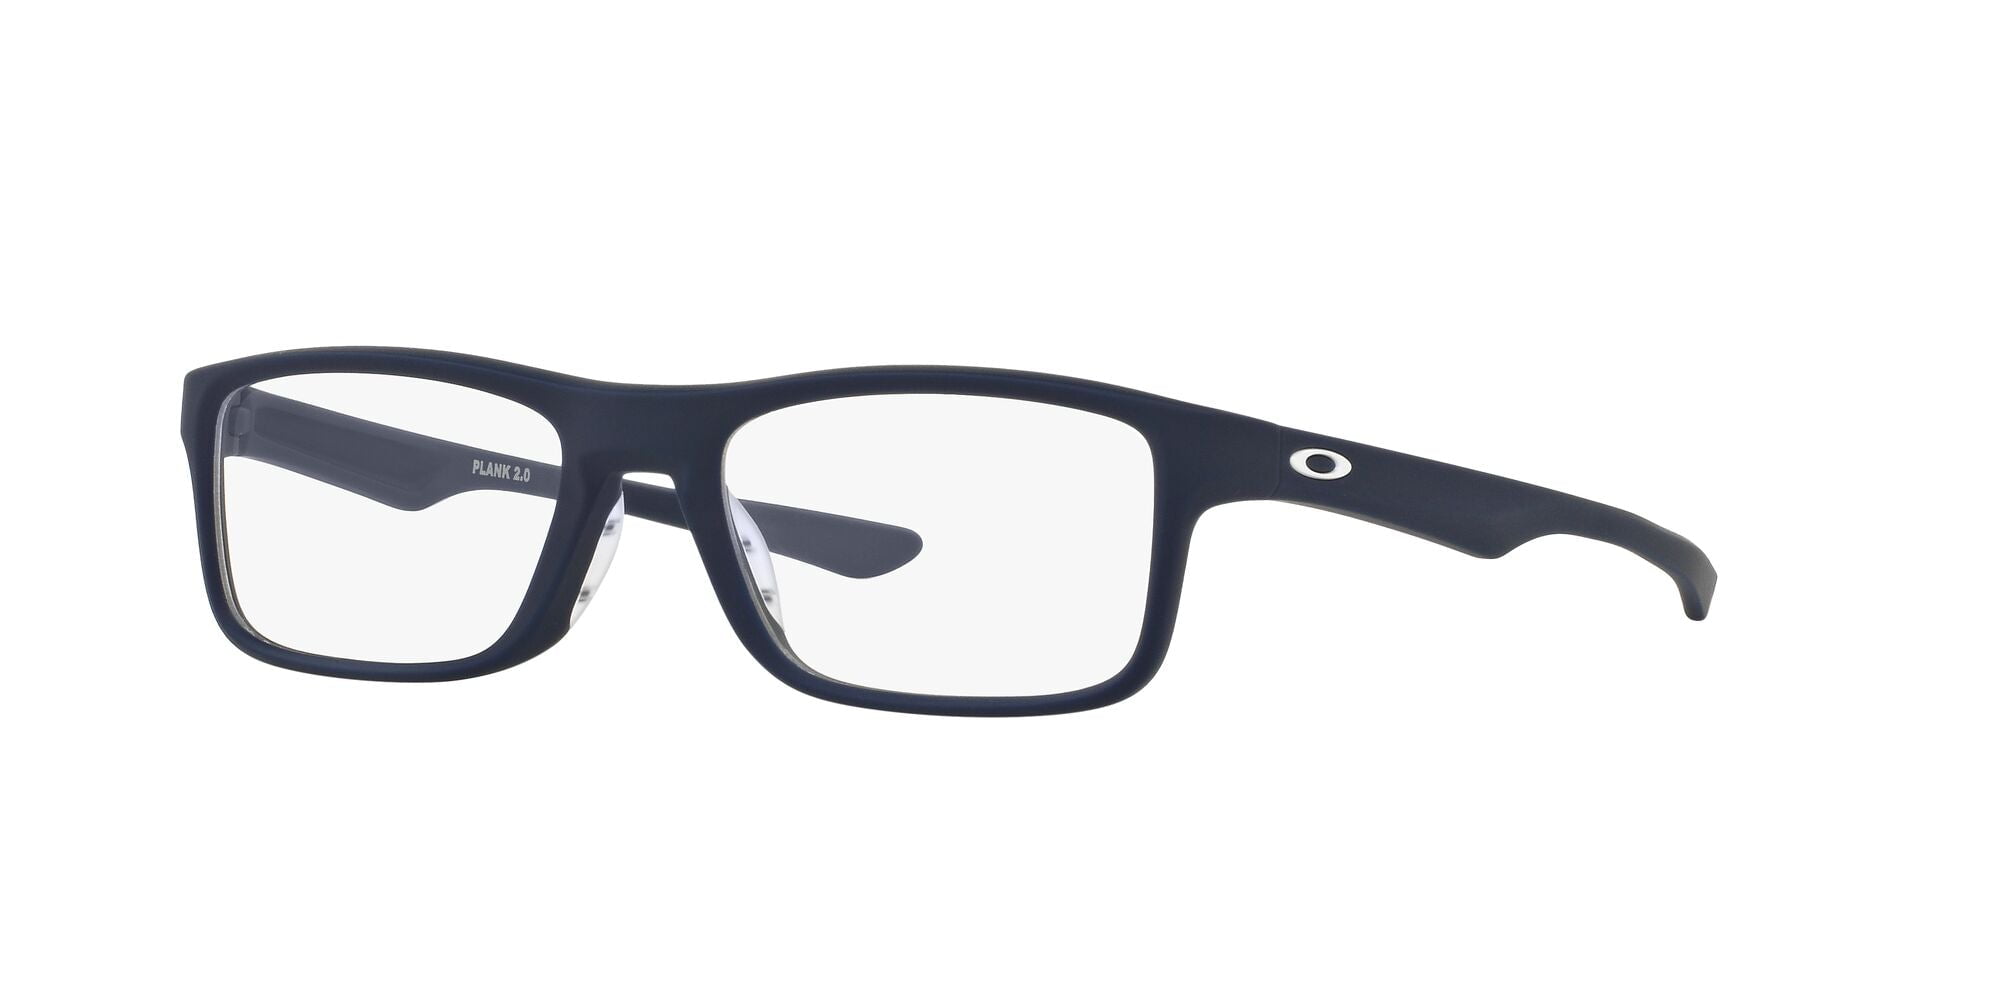 Oakley eyeglasses OX8081 Plank  (03) softcoat universal blue with demo  lenses, 53mm 